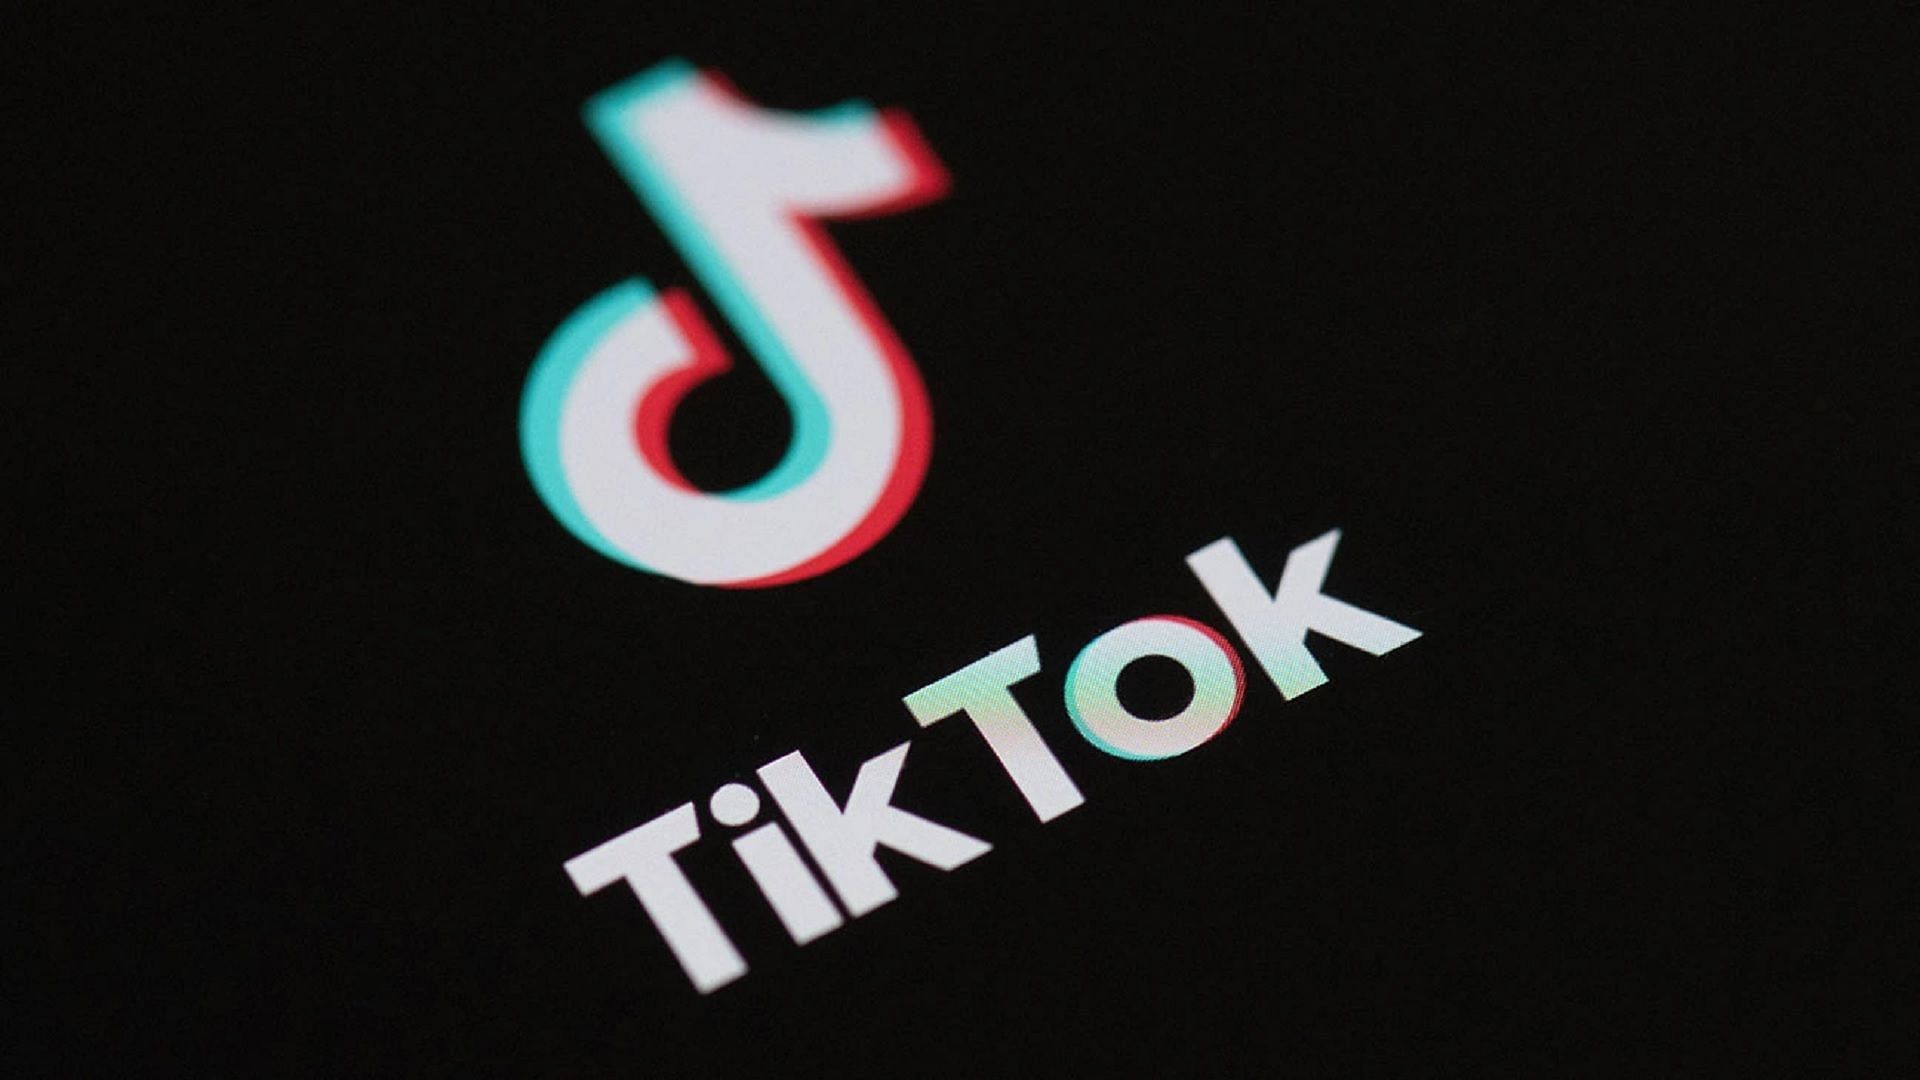 The White House instructs federal agencies to uninstall TikTok from devices issued by government (Image via Getty Images)